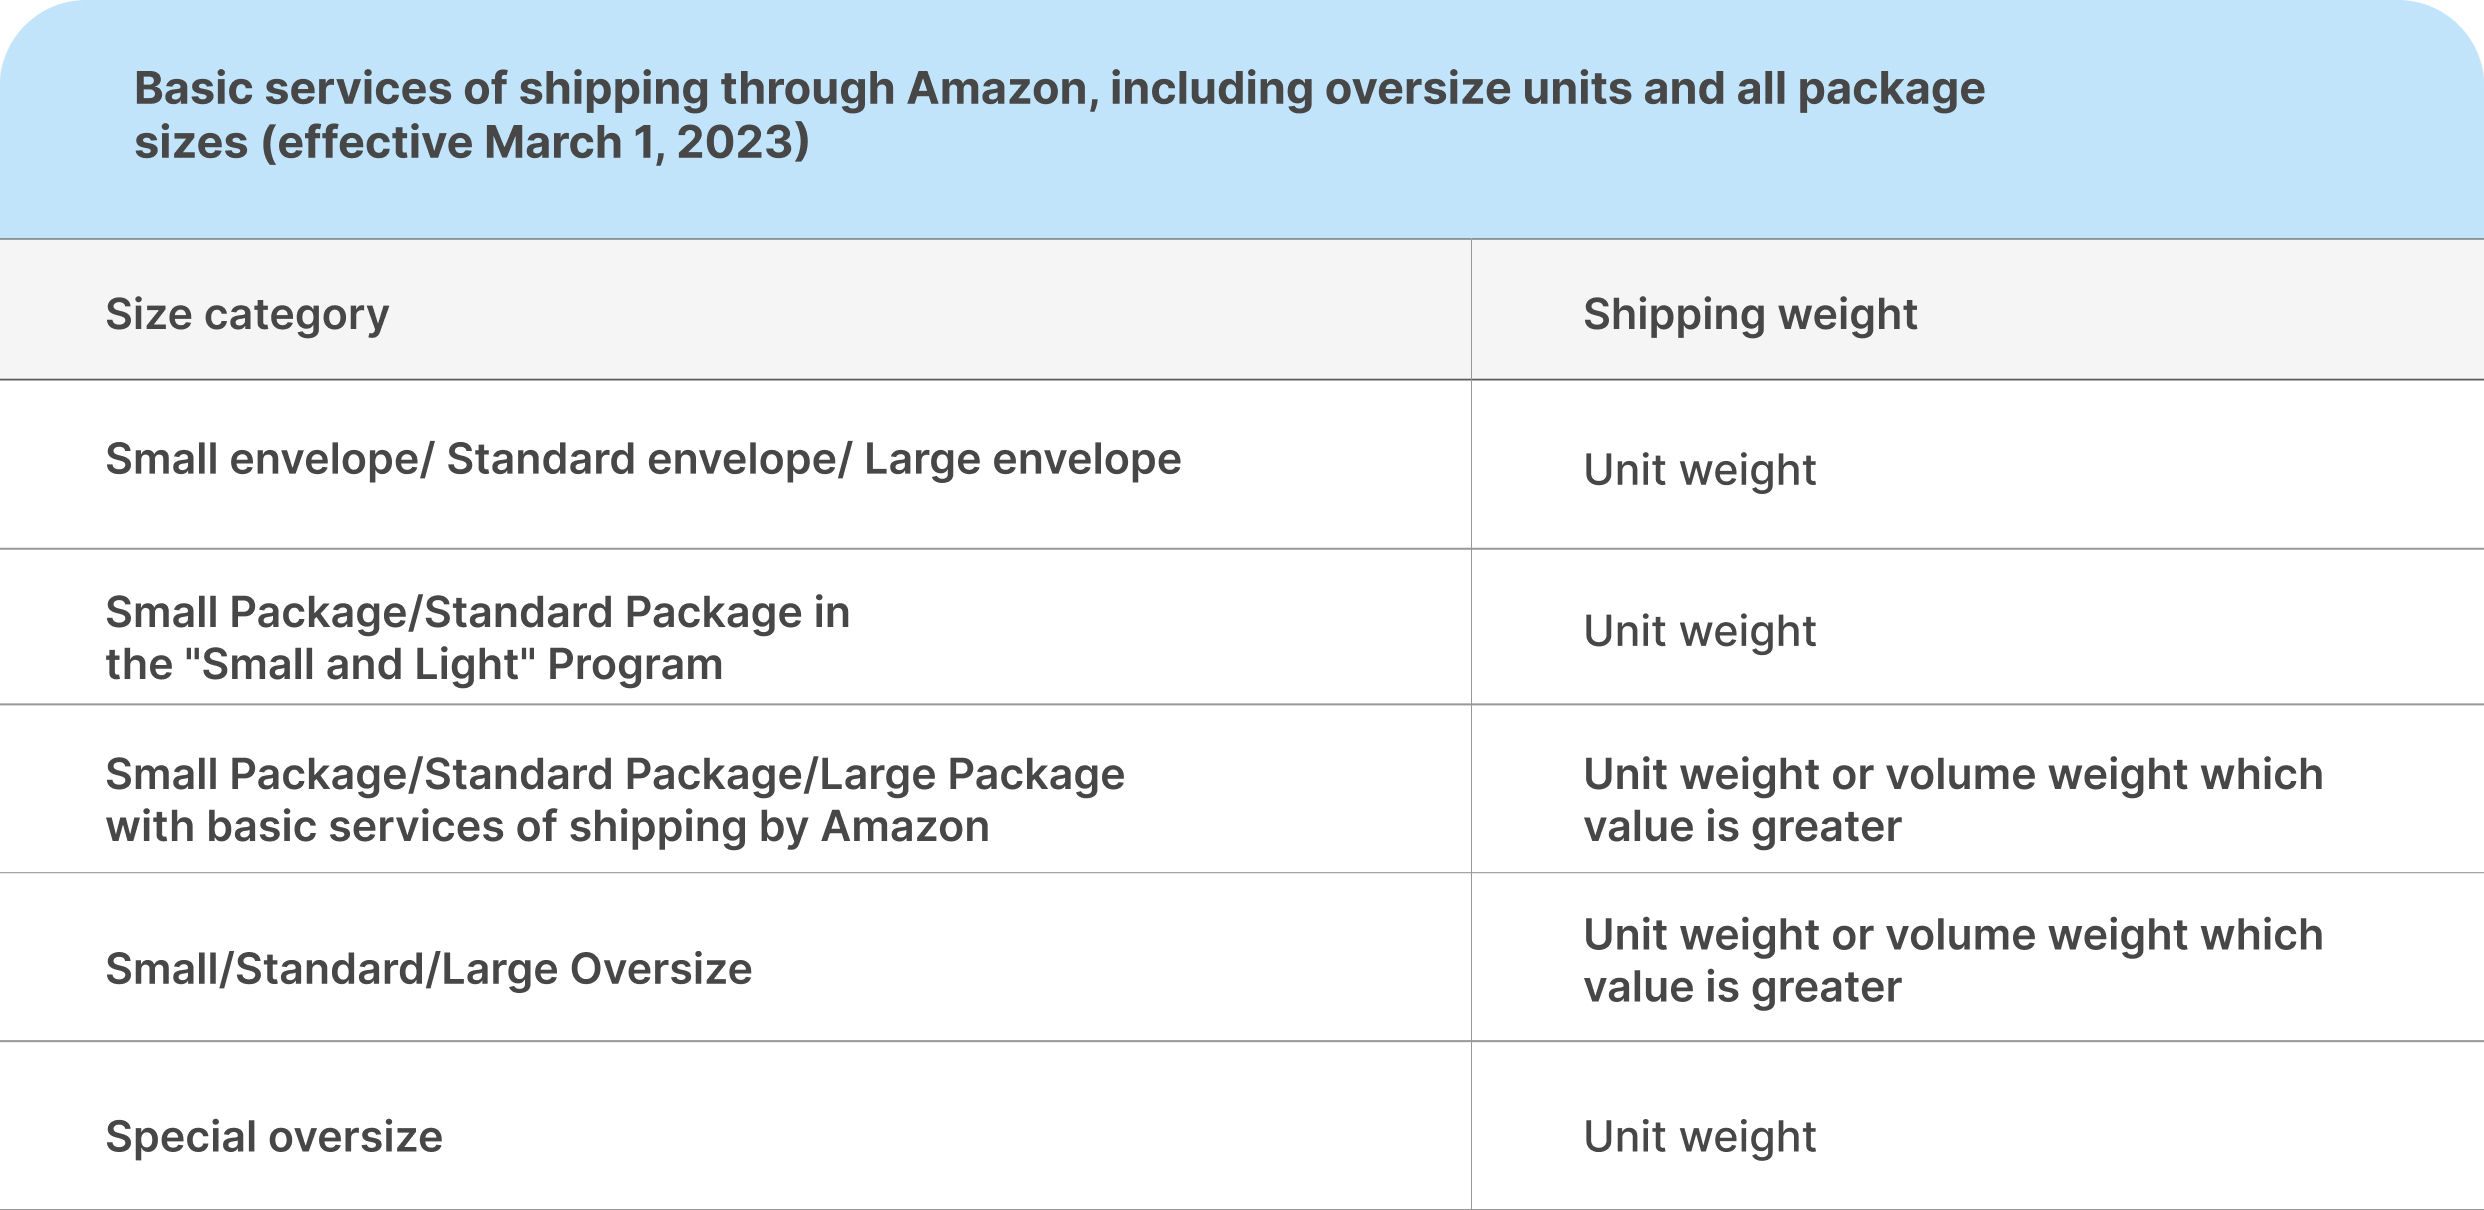 Table with shipping weights to size categories from Amazon